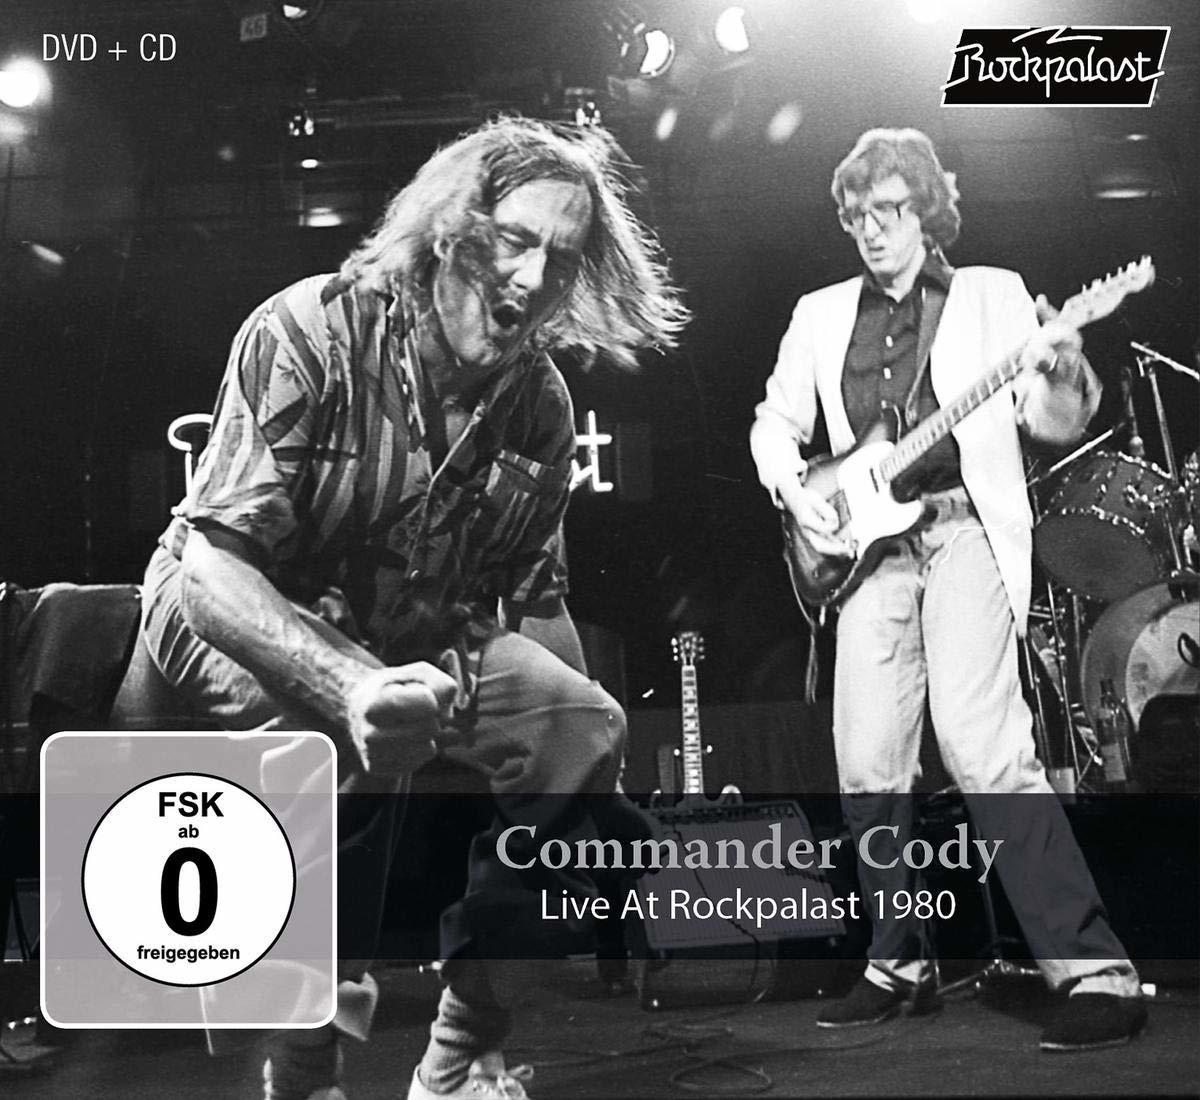 Commander Cody - Live At Video) and DVD (CD Rockpalast + - 1980 Lost Planet His Airmen